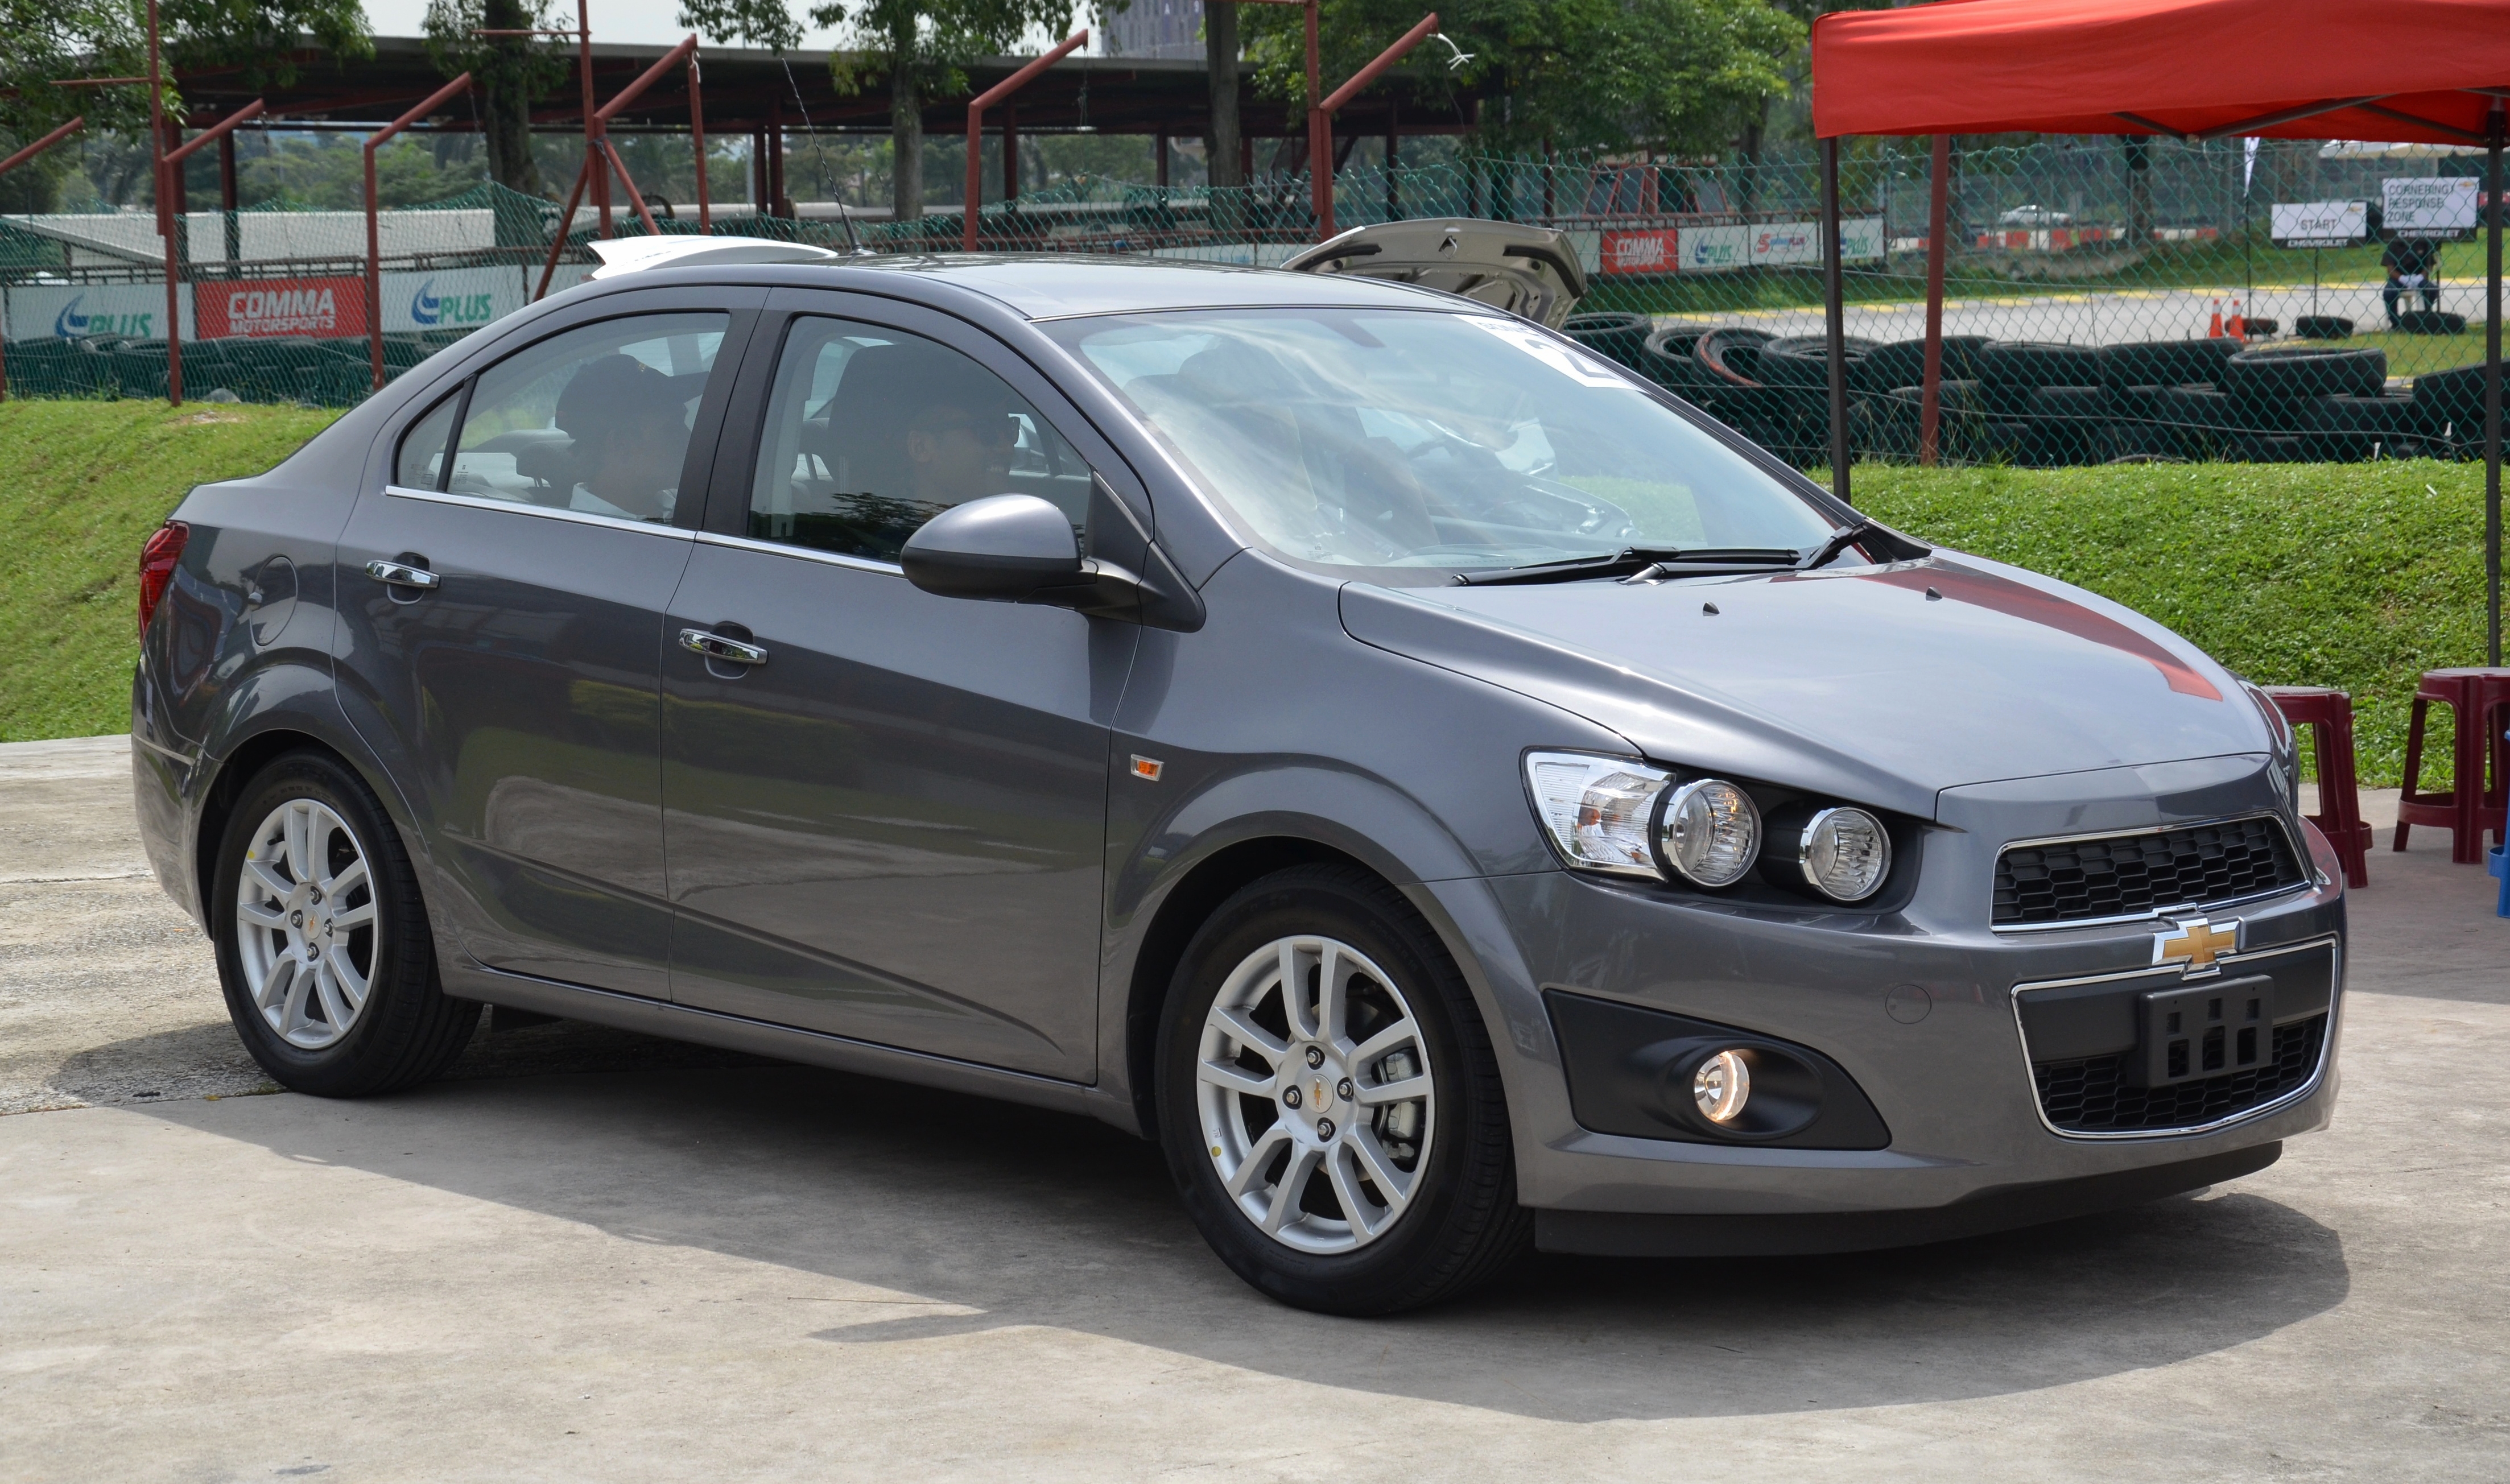 Chevrolet Aveo Hatchback 5d accessories specifications